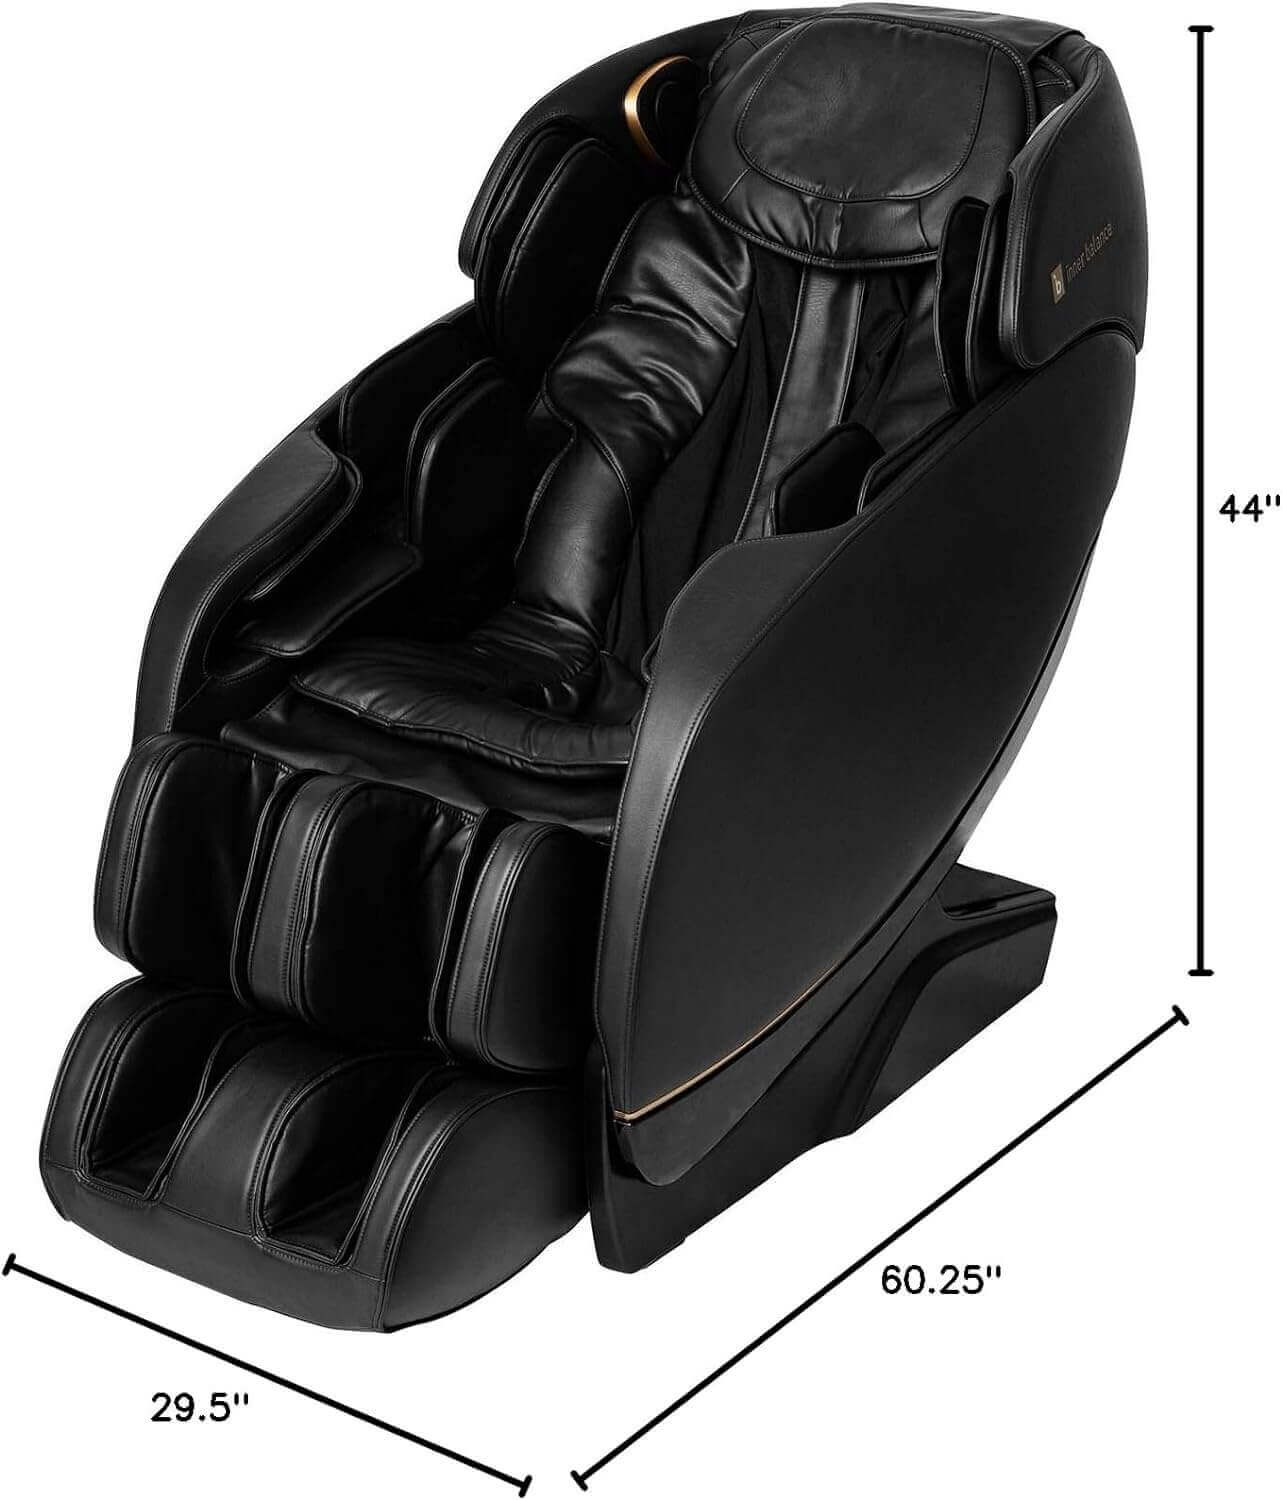 Inner Balance Jin 2.0 - Deluxe Heated SL Track Zero Gravity Massage Chair - Electric Massaging Chairs